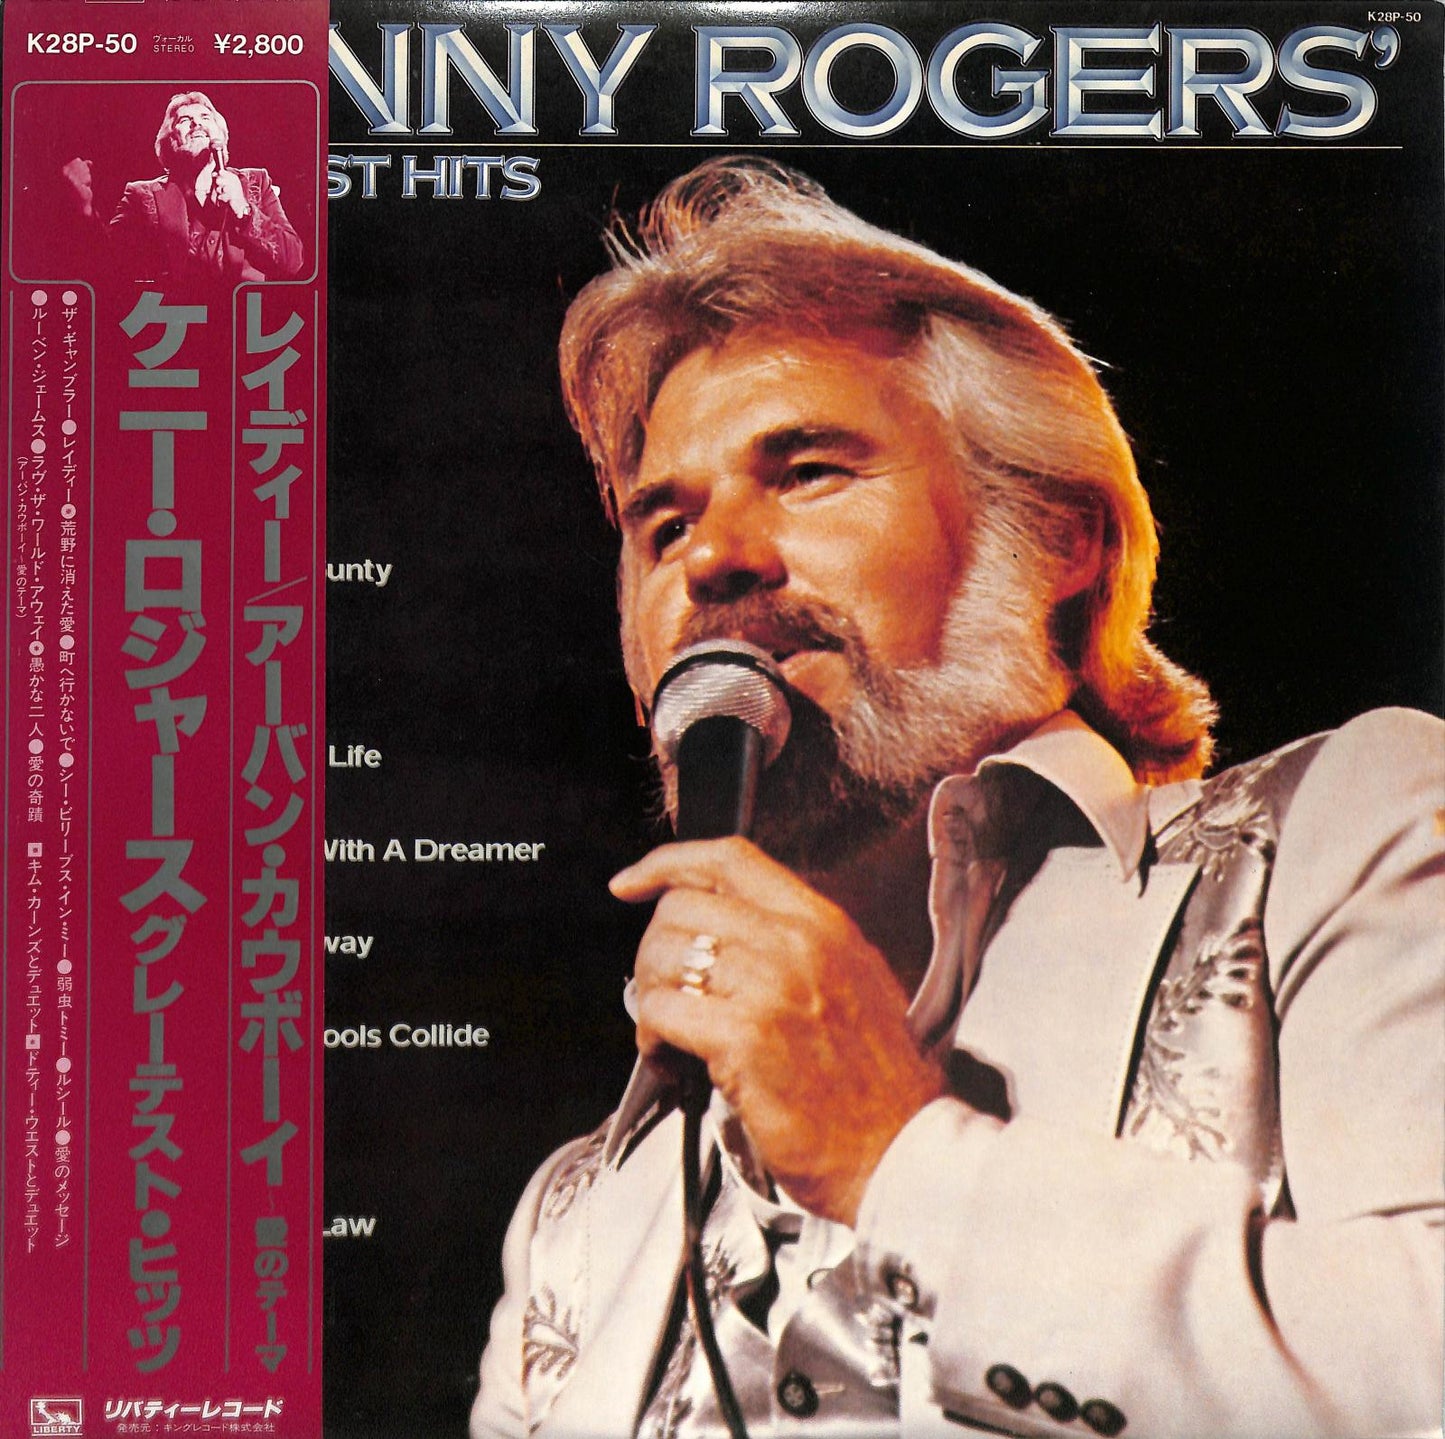 KENNY ROGERS - Greatest Hits